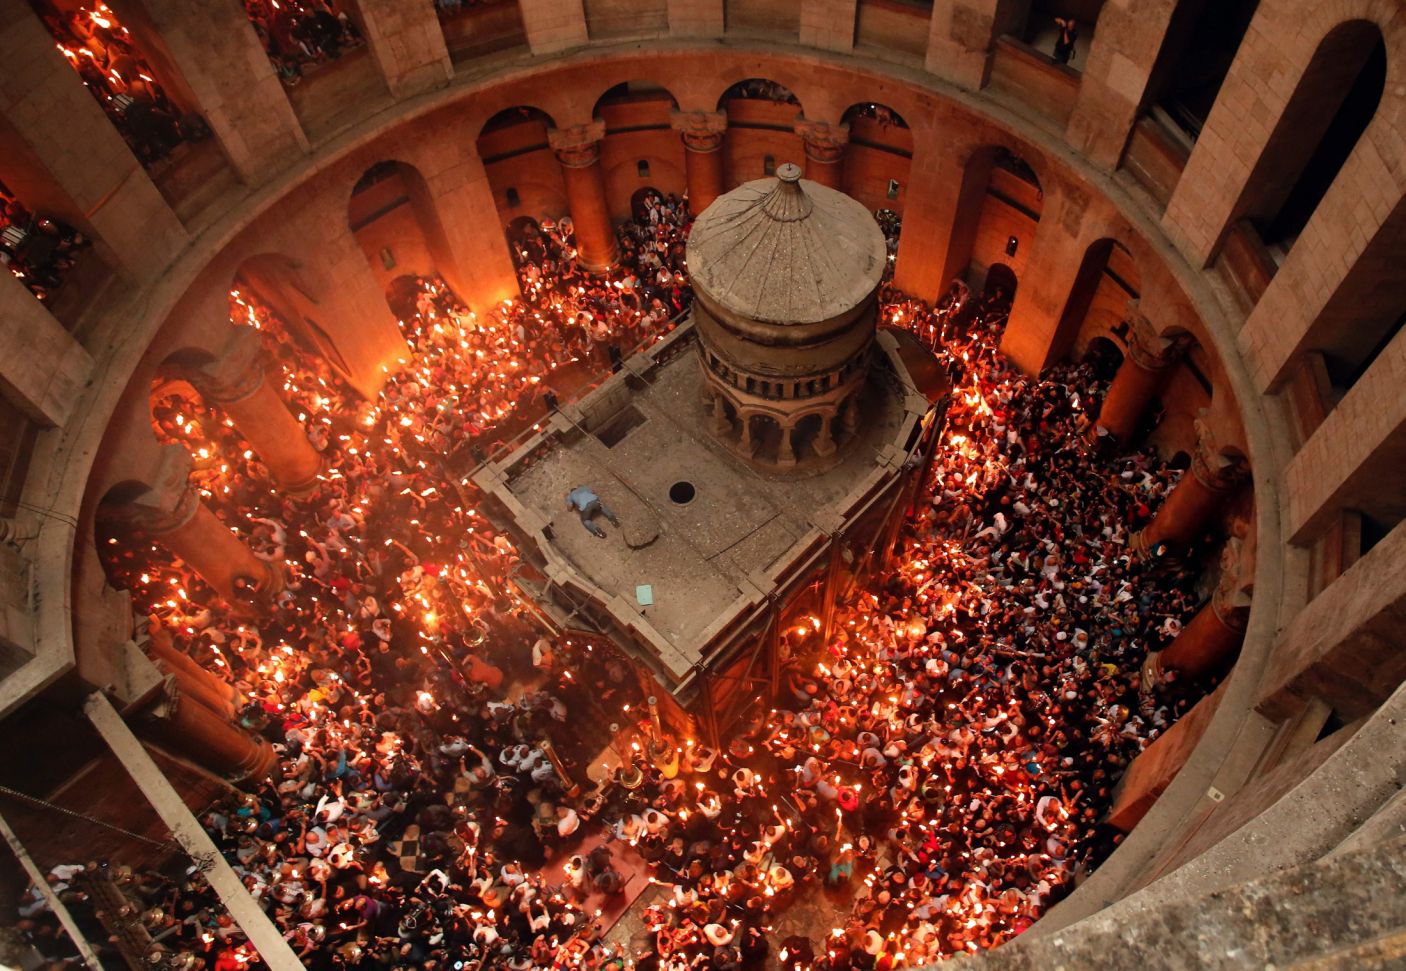 Christian Orthodox worshippers hold up candles lit from the "Holy Fire" as thousands gather in the Church of the Holy Sepulchre in Jerusalem's Old City, on April 30, 2016. Credit: Thomas Coex, AFP